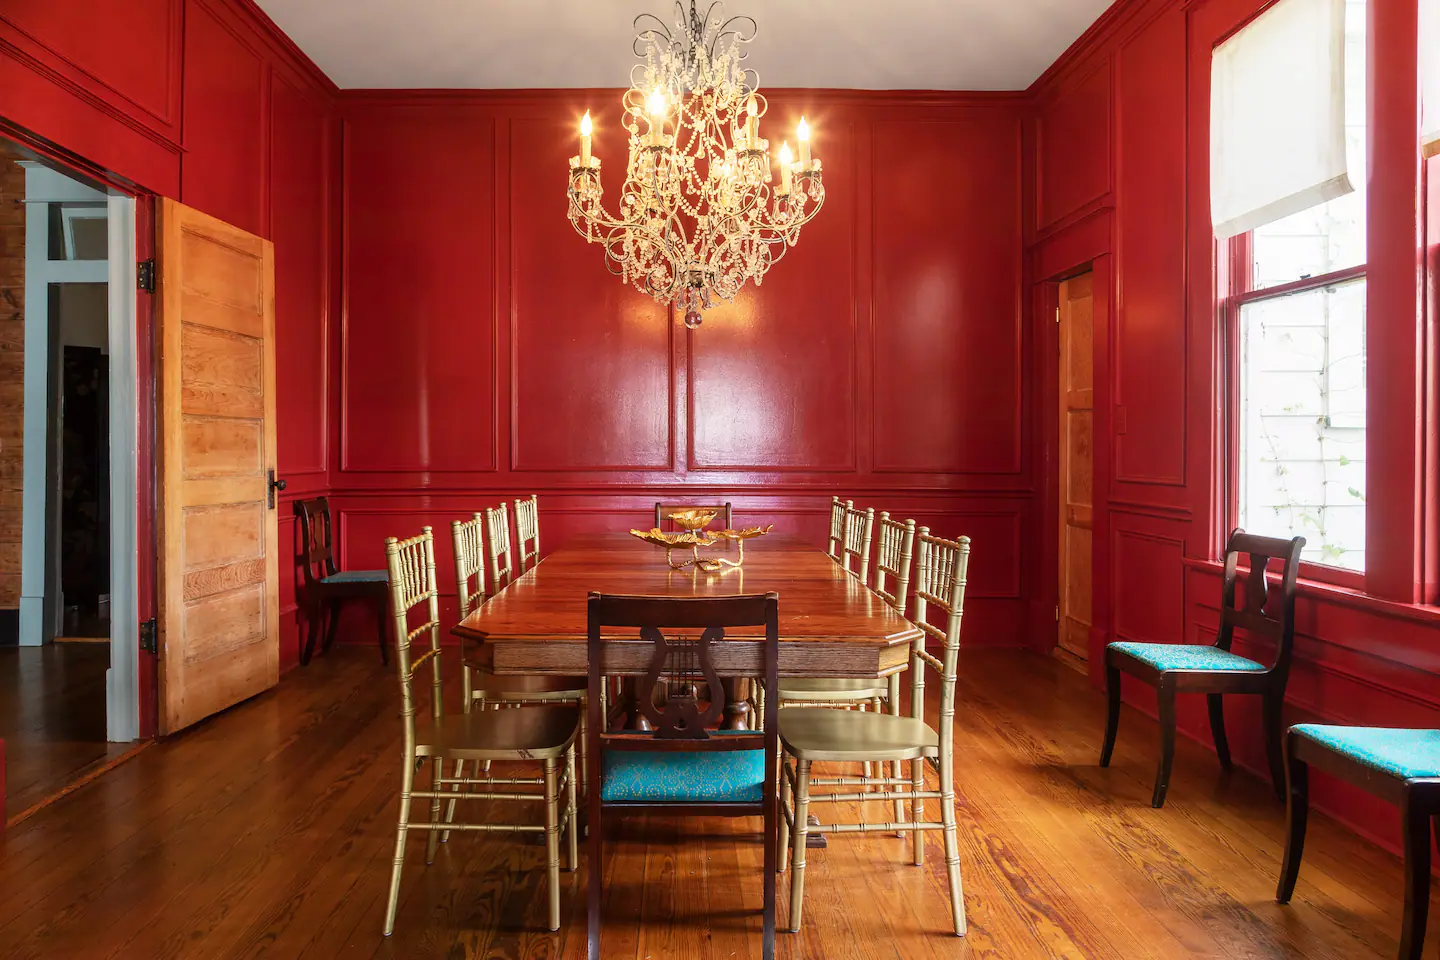 Entertain your family or guests in our classic formal dining room.